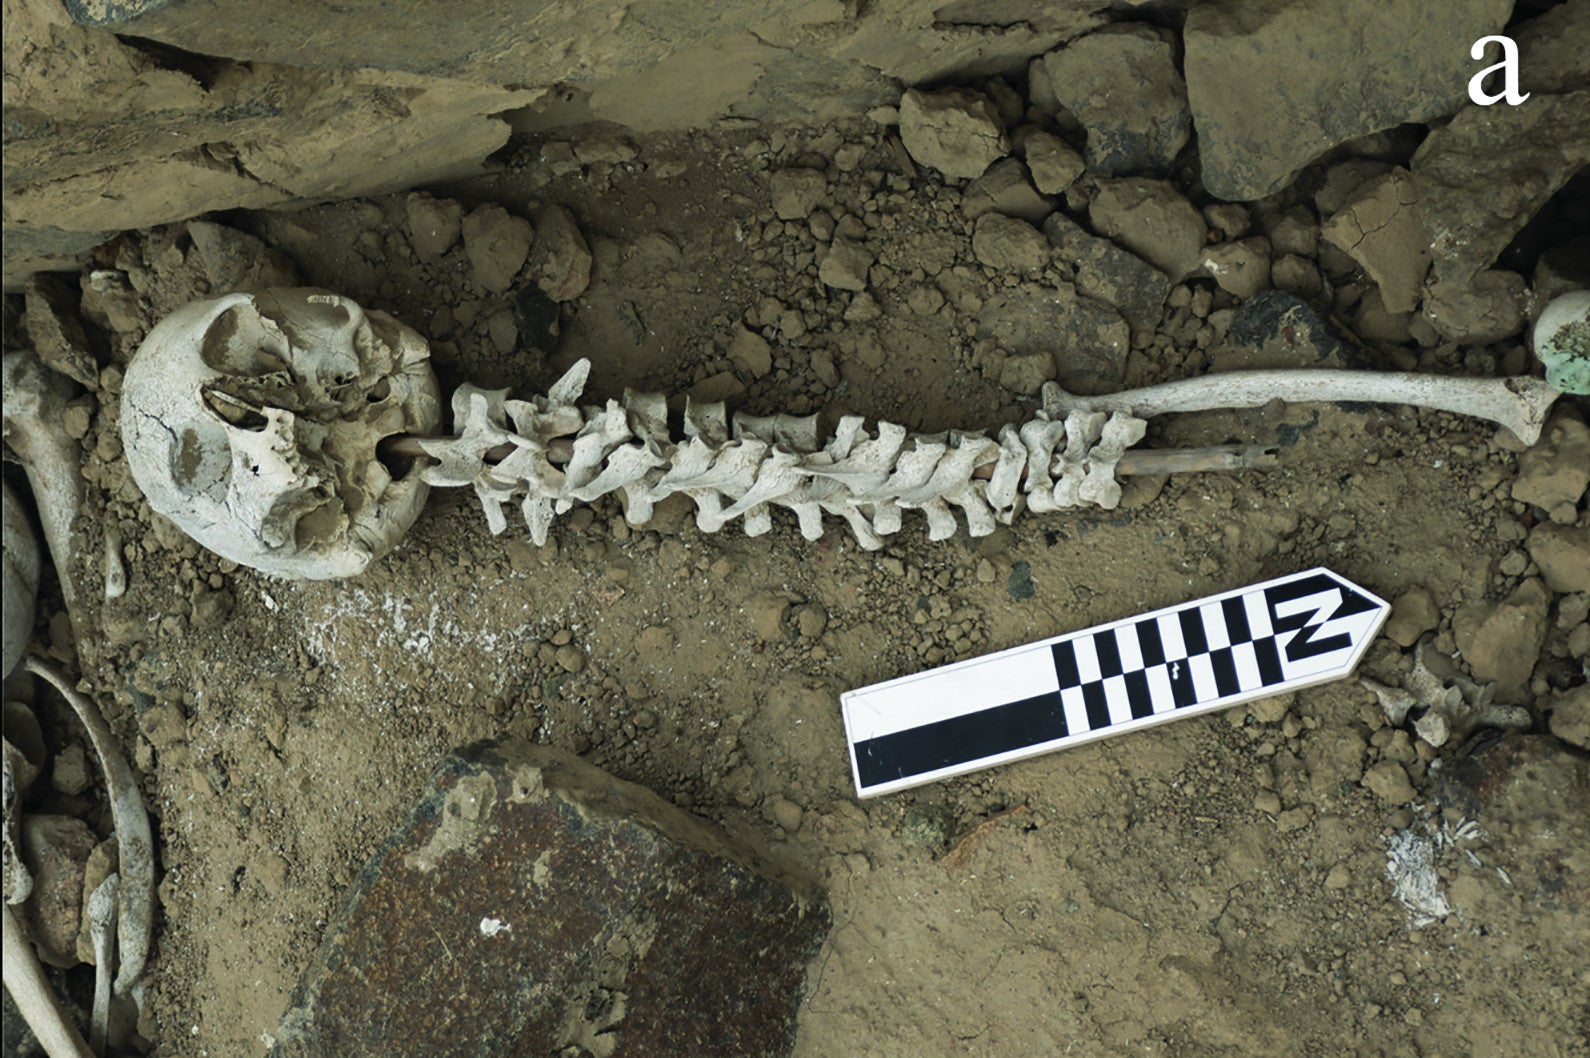 Human Spines Threaded Onto Posts Found at 500-Year-Old Burial Site in Peru